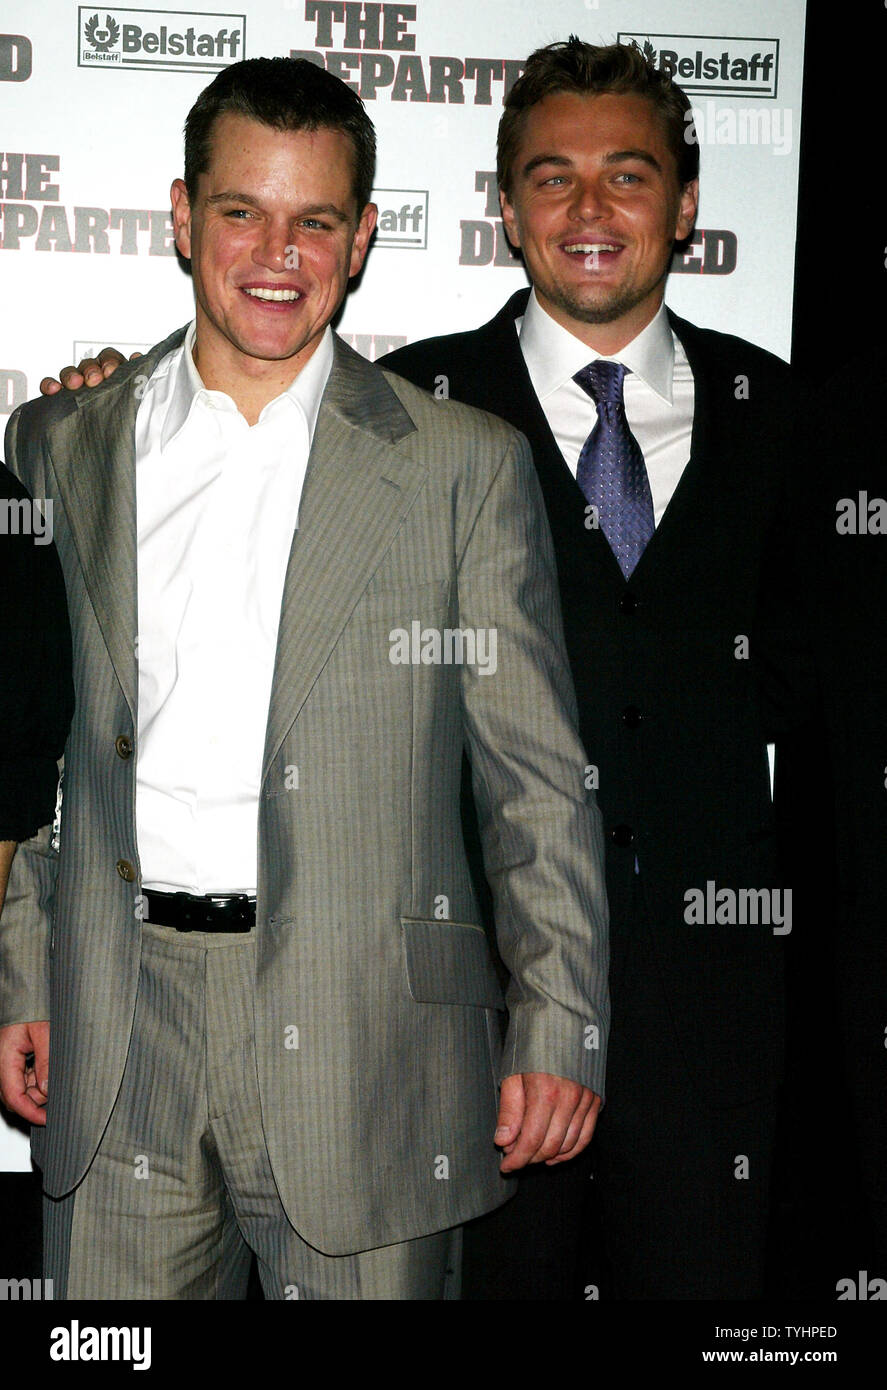 Matt Damon Left And Leonardo Dicaprio Arrive For The Premiere Of Their New Movie The Departed At The Ziegfeld Theater In New York On September 26 2006 Upi Photo Laura Cavanaugh Stock Photo